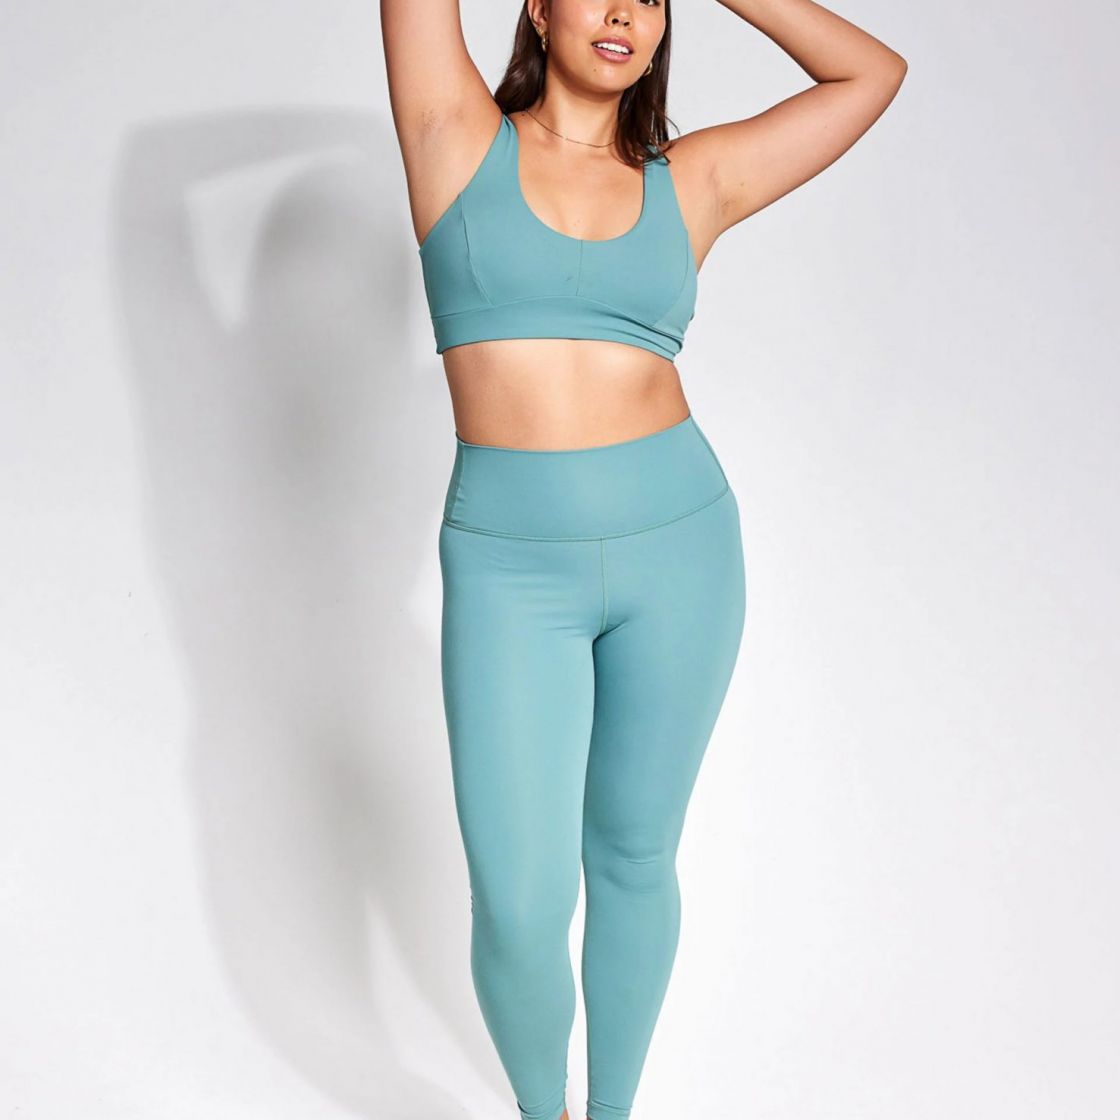 Tala Skinluxe Leggings, Make Your Gym Kit More Sustainable With Our  Favourite Eco-Friendly Leggings